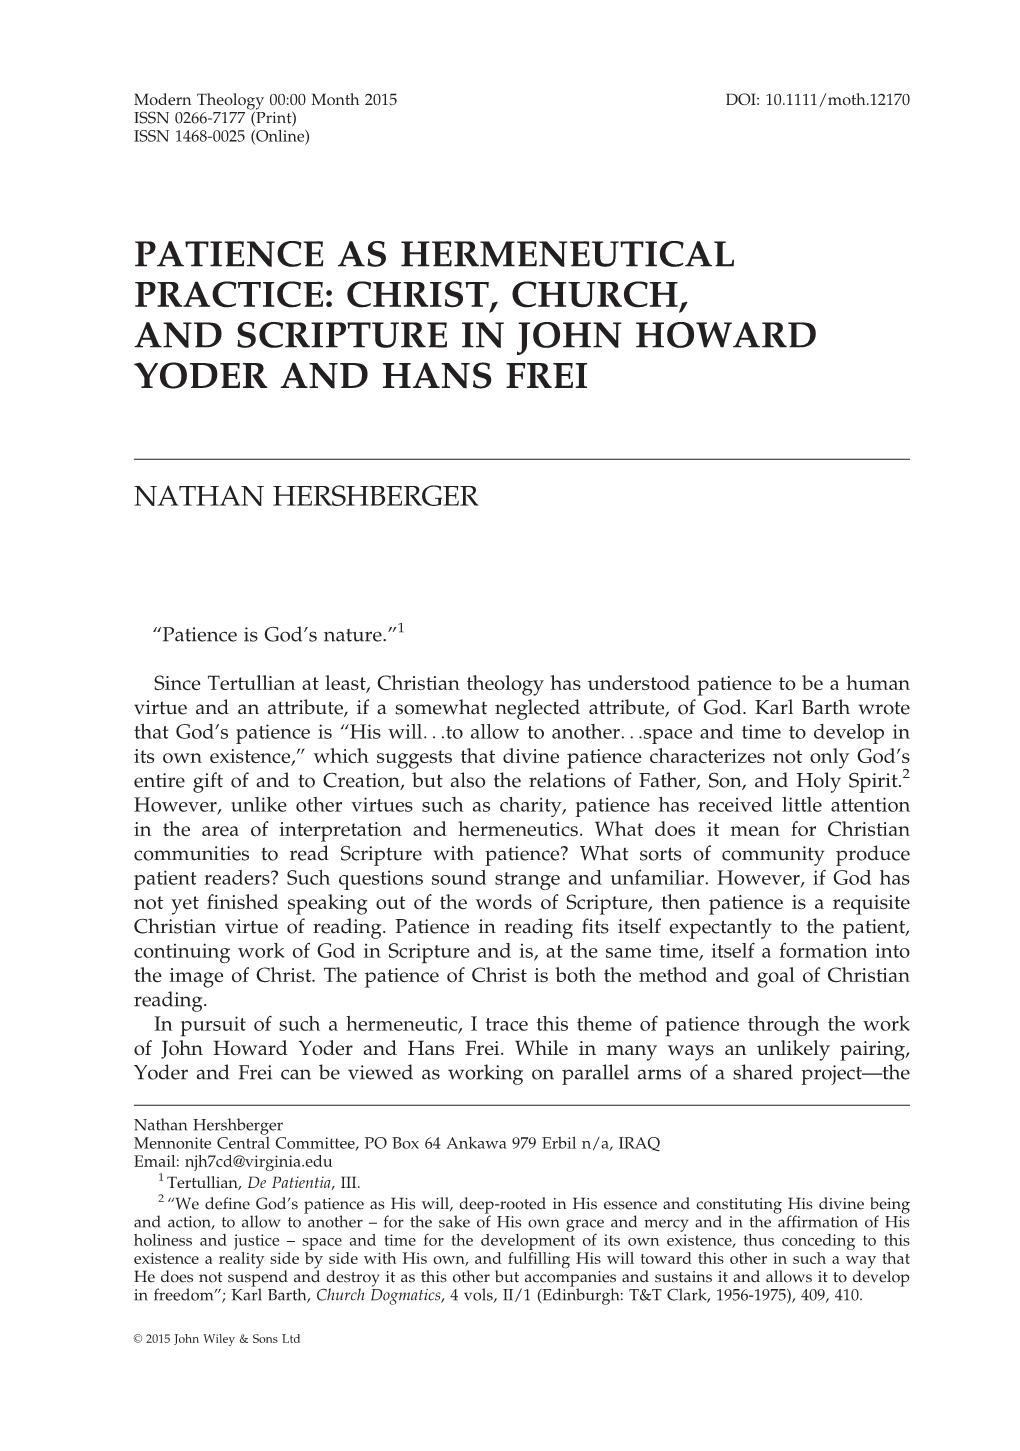 Patience As Hermeneutical Practice: Christ, Church, and Scripture in John Howard Yoder and Hans Frei